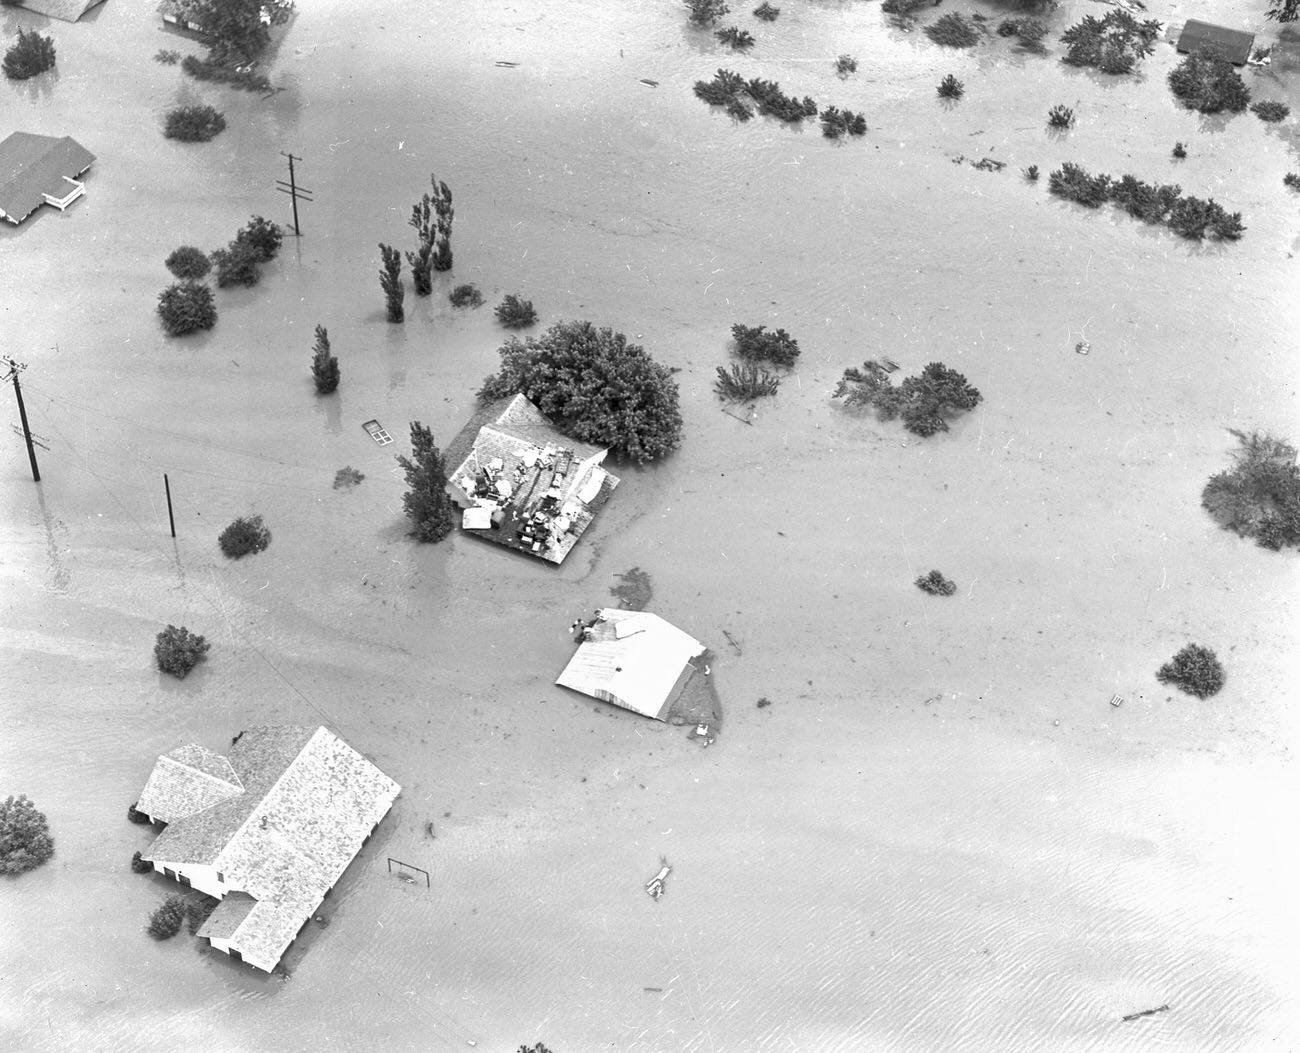 Fort Worth, Texas, flood of 1949, showing a submerged neighborhood. Atop one home sits the residents' possessions. A few people can be seen standing on the roof of another home.